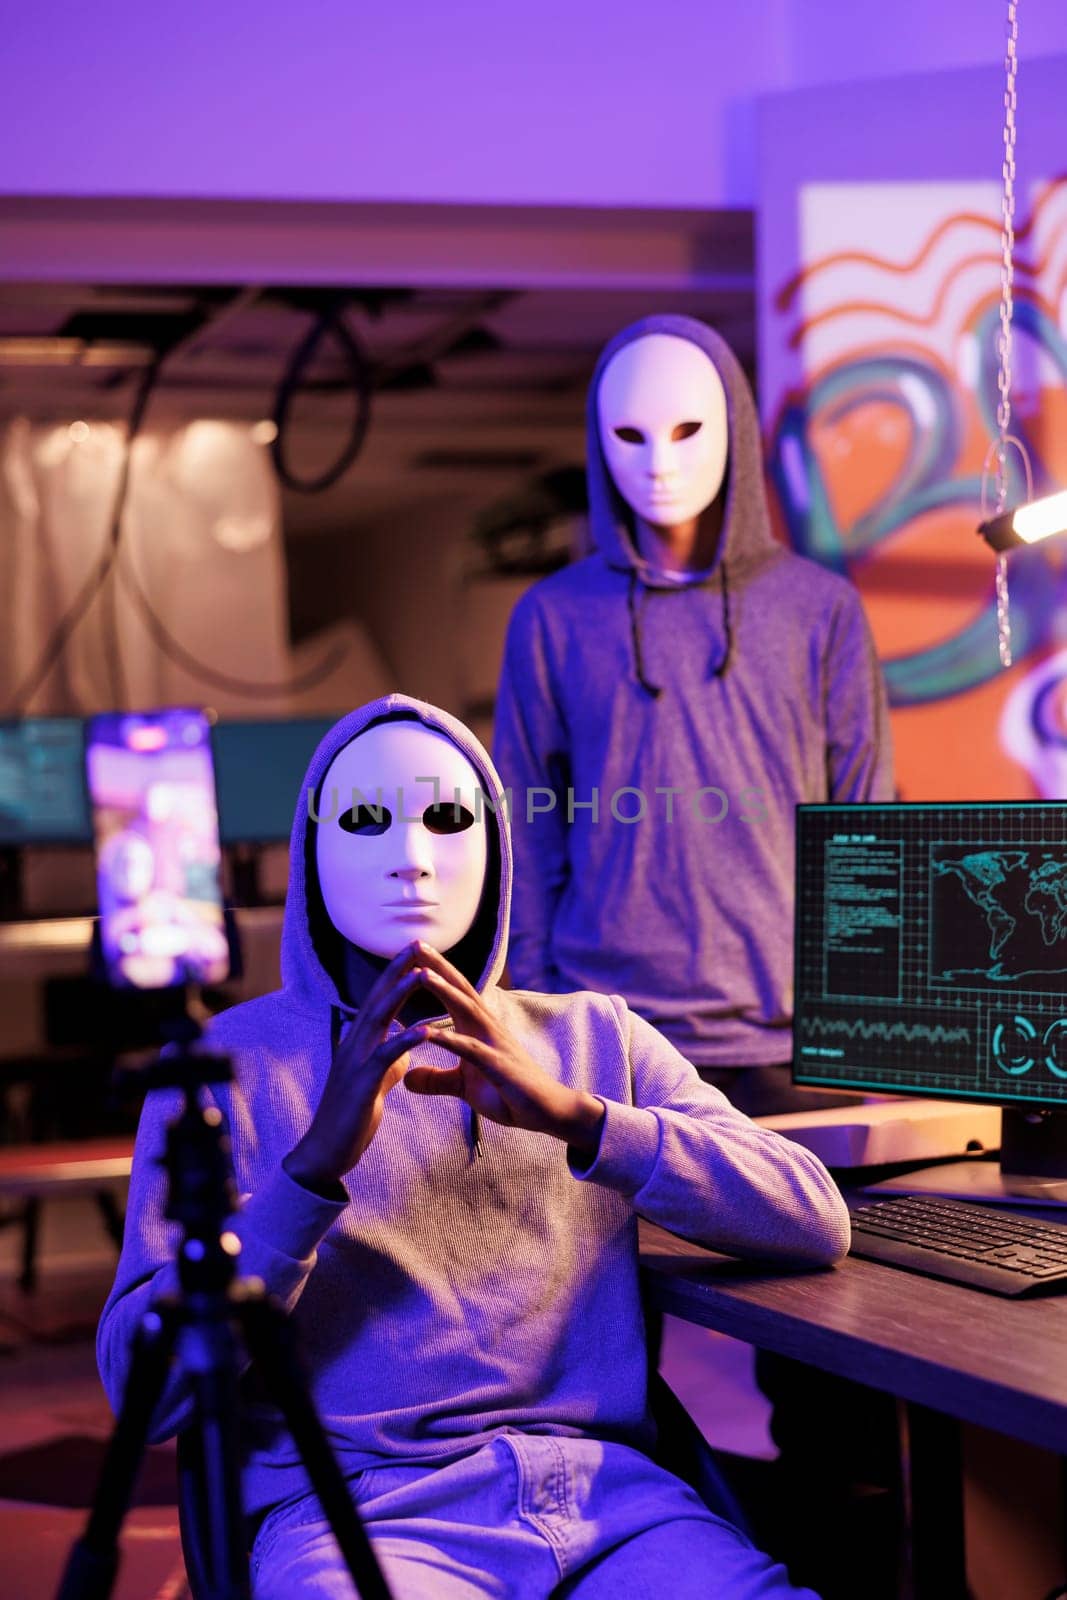 Scammers in anonymous masks streaming threat online and demand victim for payment. Hackers with hidden identity filming ransom message on mobile phone in abandoned warehouse